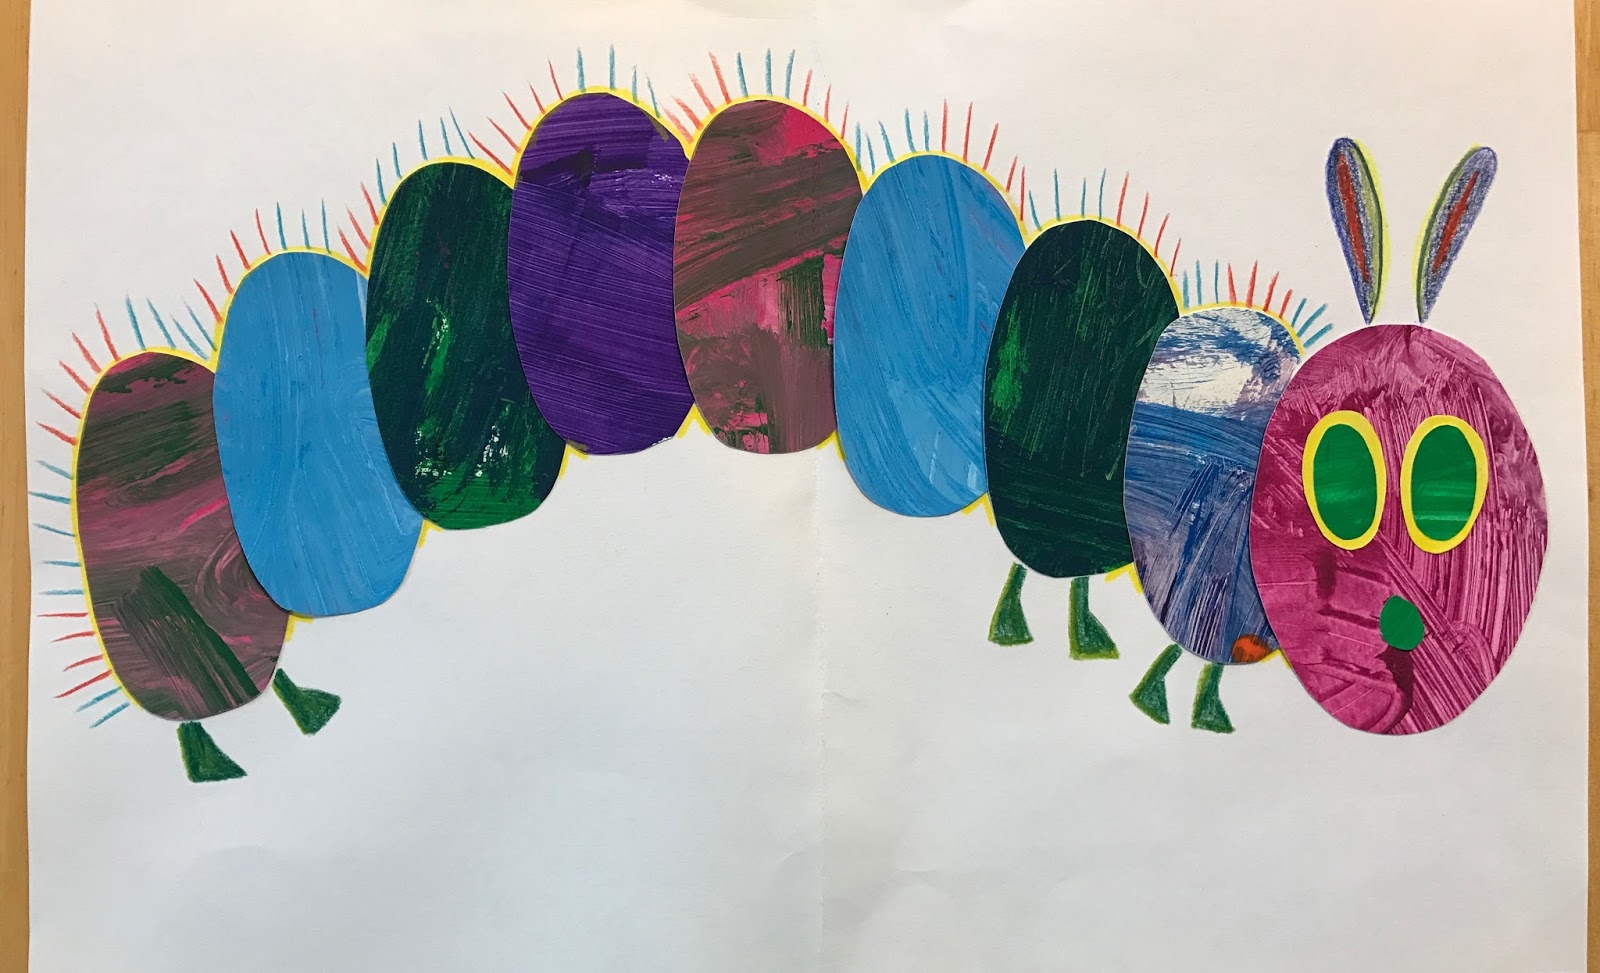 Kathy's Art Project Ideas "The Very Hungry Caterpillar" By Eric Carle